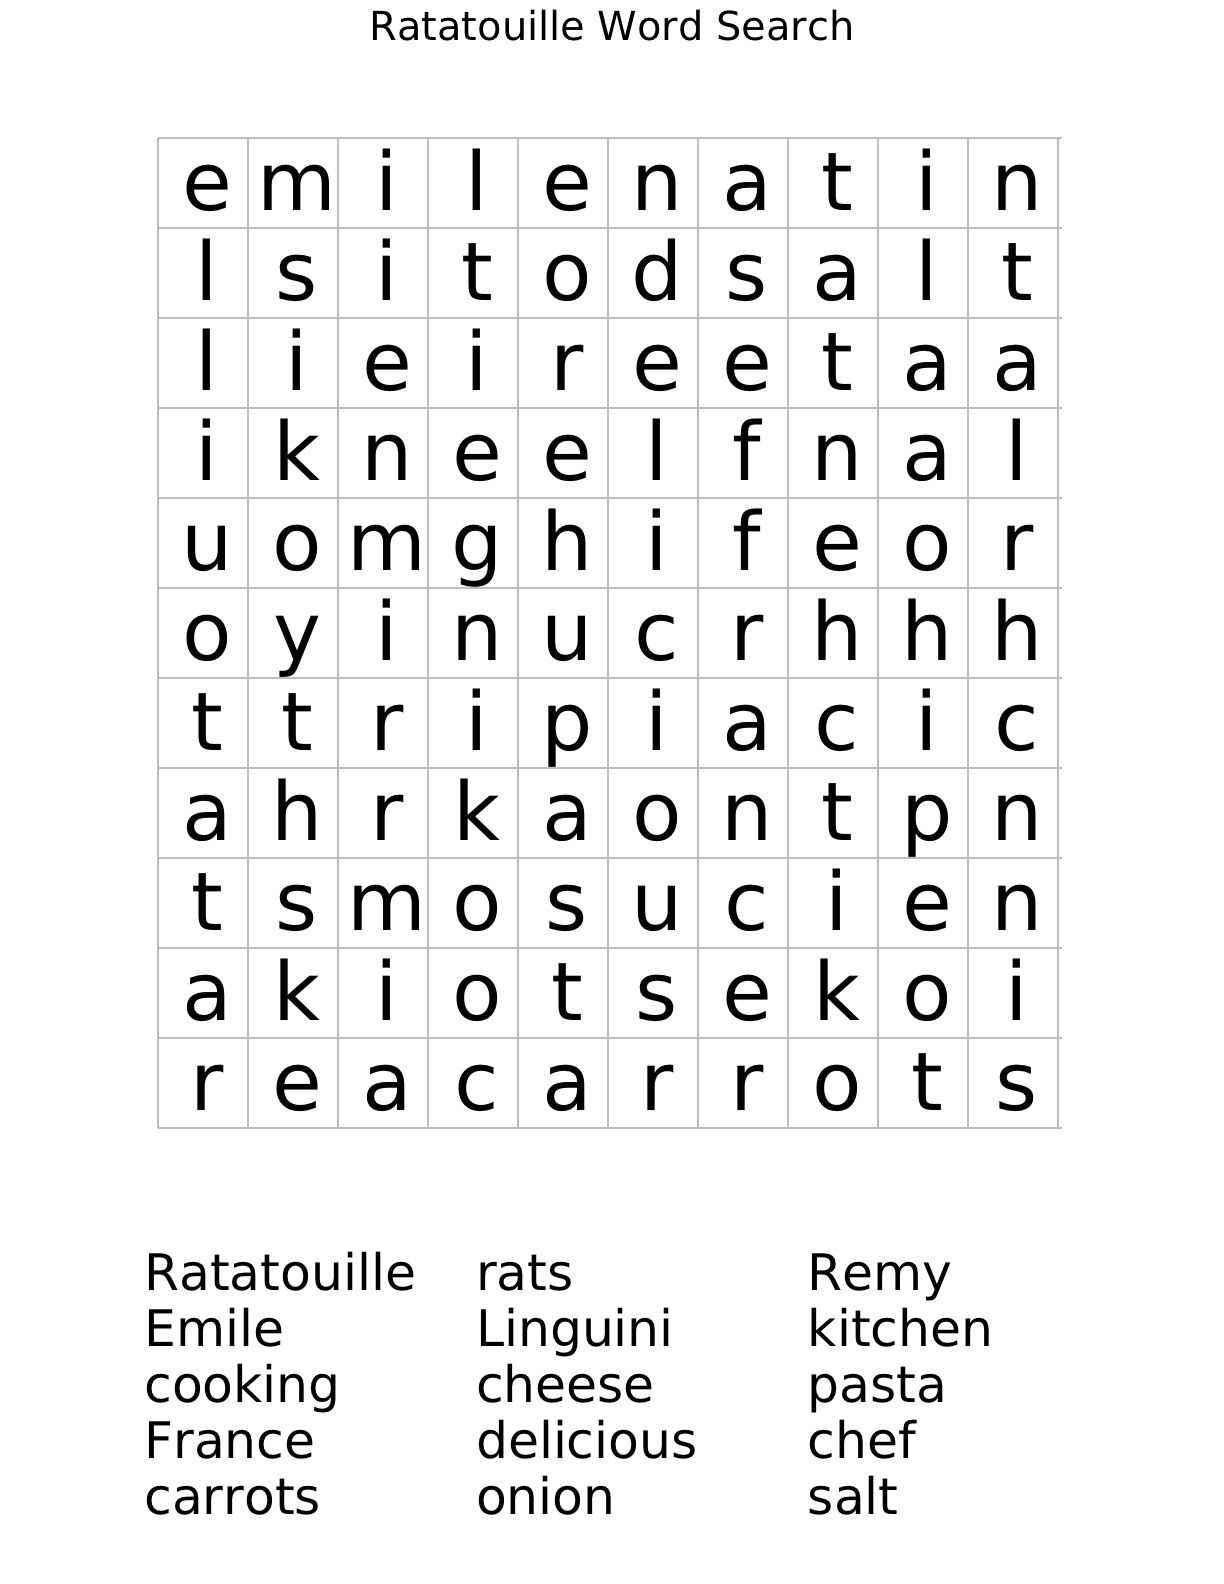 The Alamo Worksheet Answers as Well as Ratatouille Word Search Worksheet